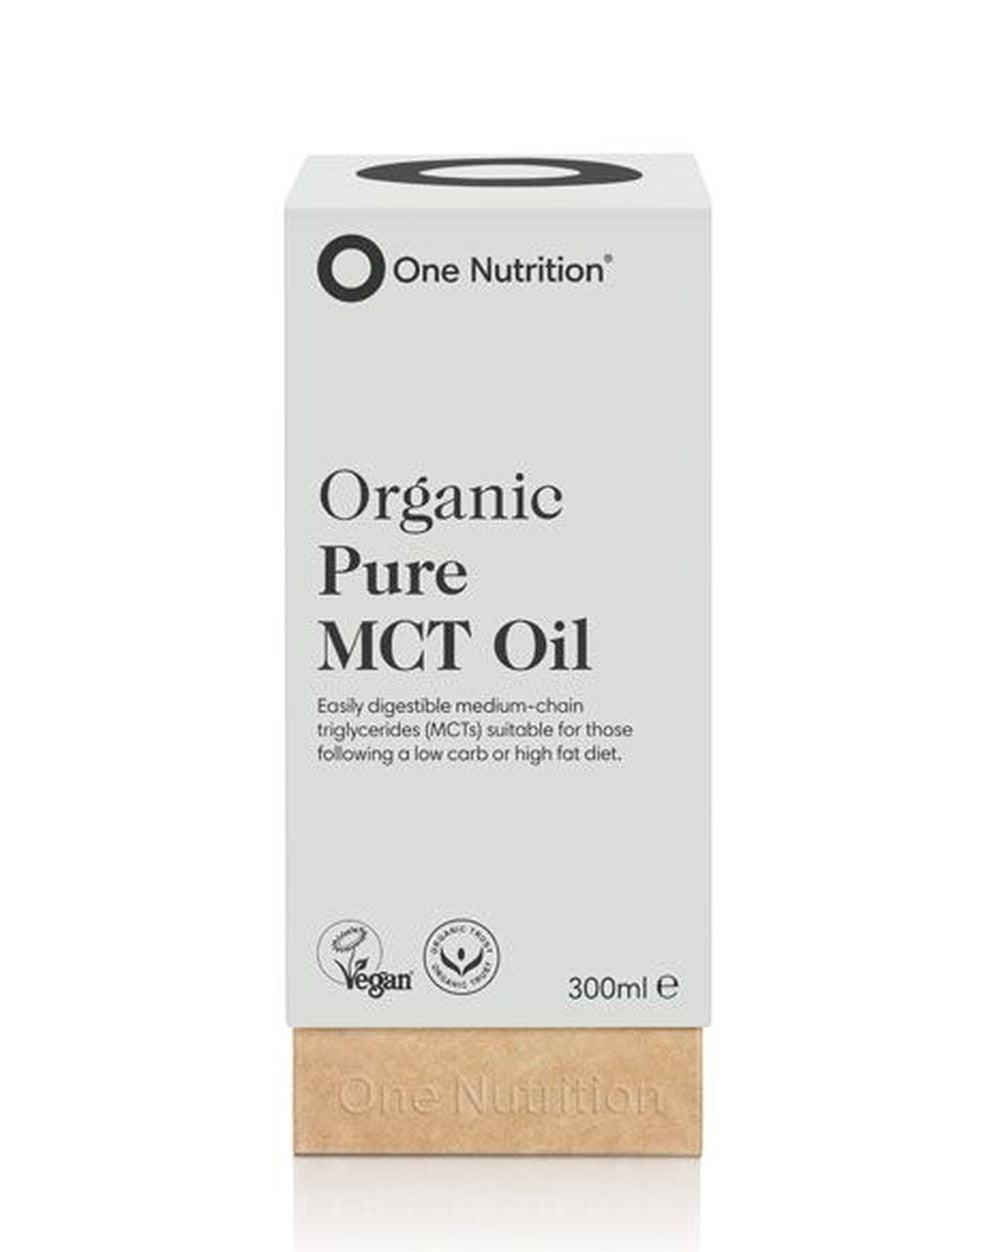 One Nutrition Organic Pure MCT Oil- Lillys Pharmacy and Health Store